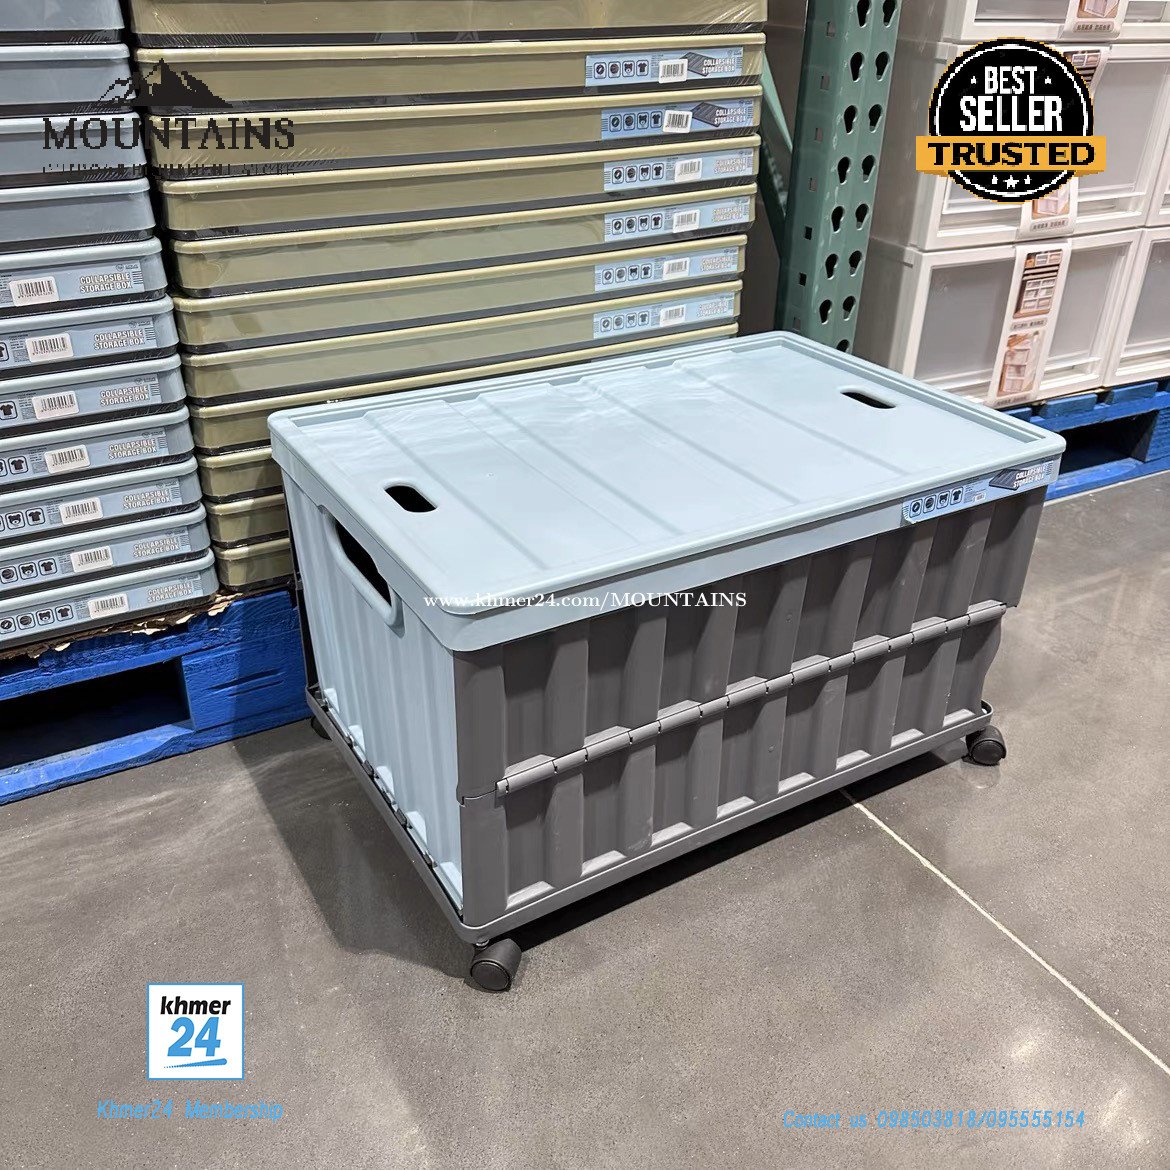 https://images.khmer24.co/23-03-19/194352-citylife-64l-collapsible-storage-with-lids-and-wheels-plastic-storage-containers-for-organizing-stuff-1679217193-86513426-b.jpg